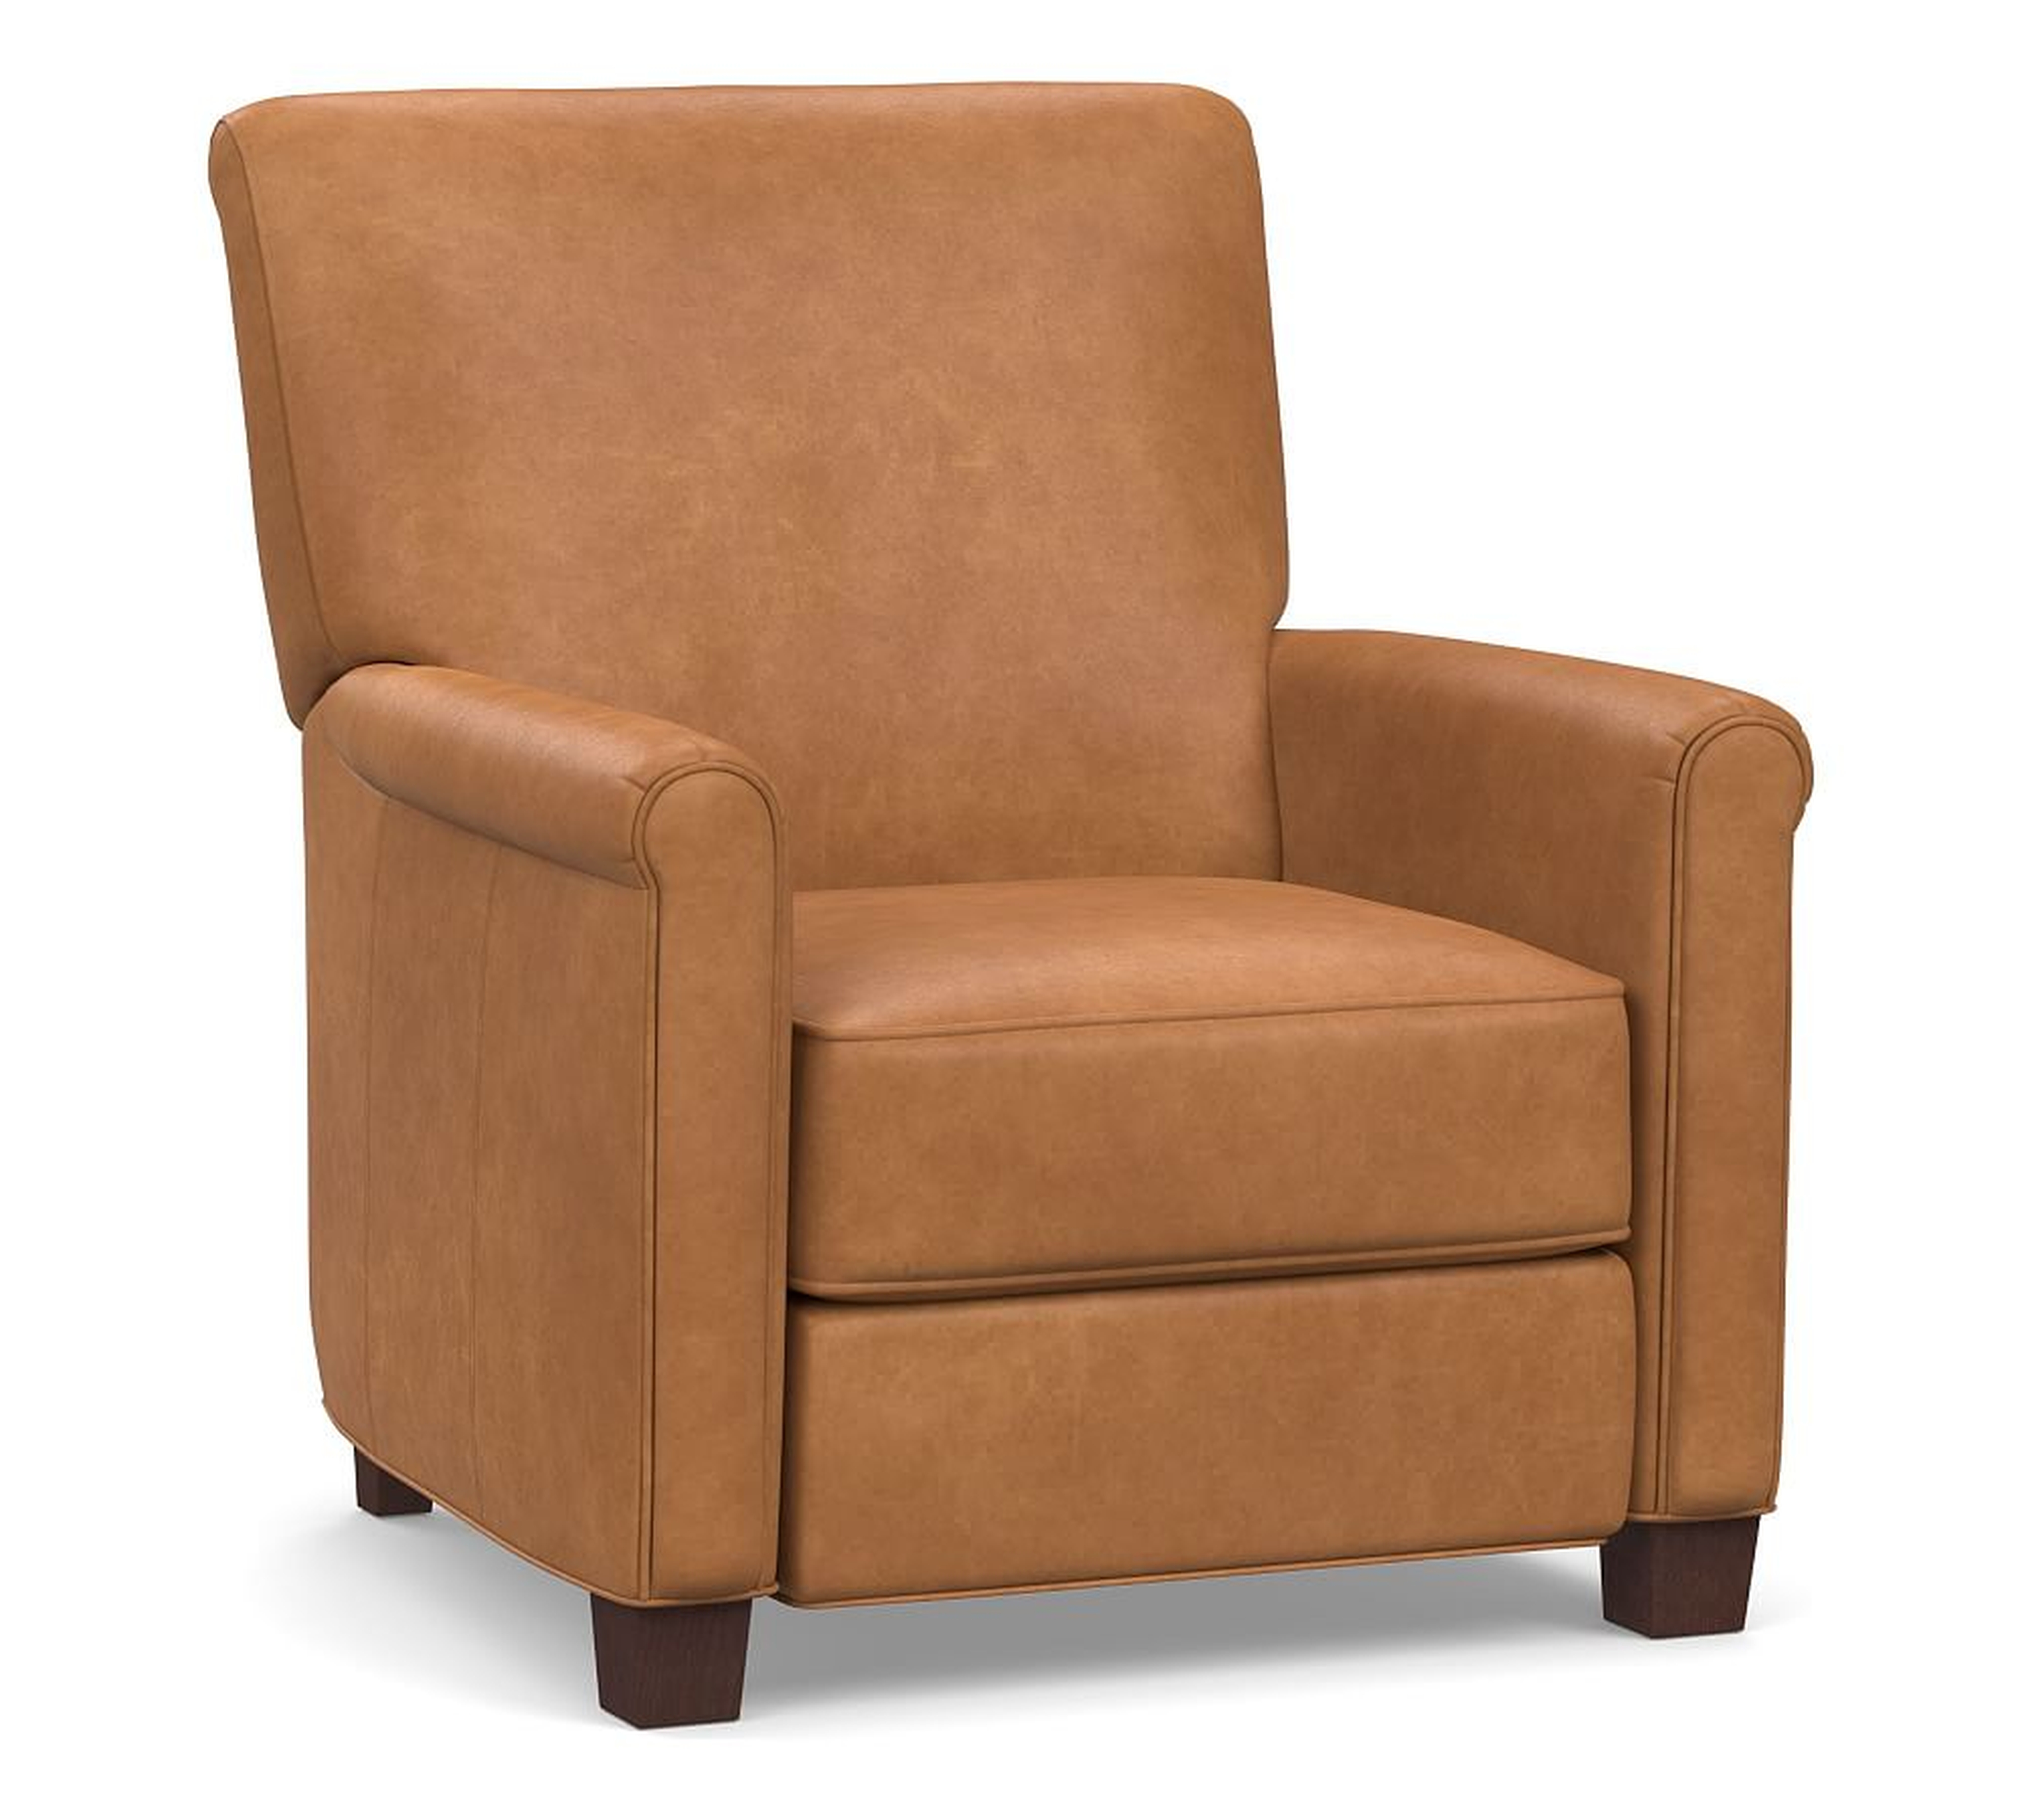 Irving Roll Arm Leather Recliner, Polyester Wrapped Cushions, Churchfield Camel - Pottery Barn